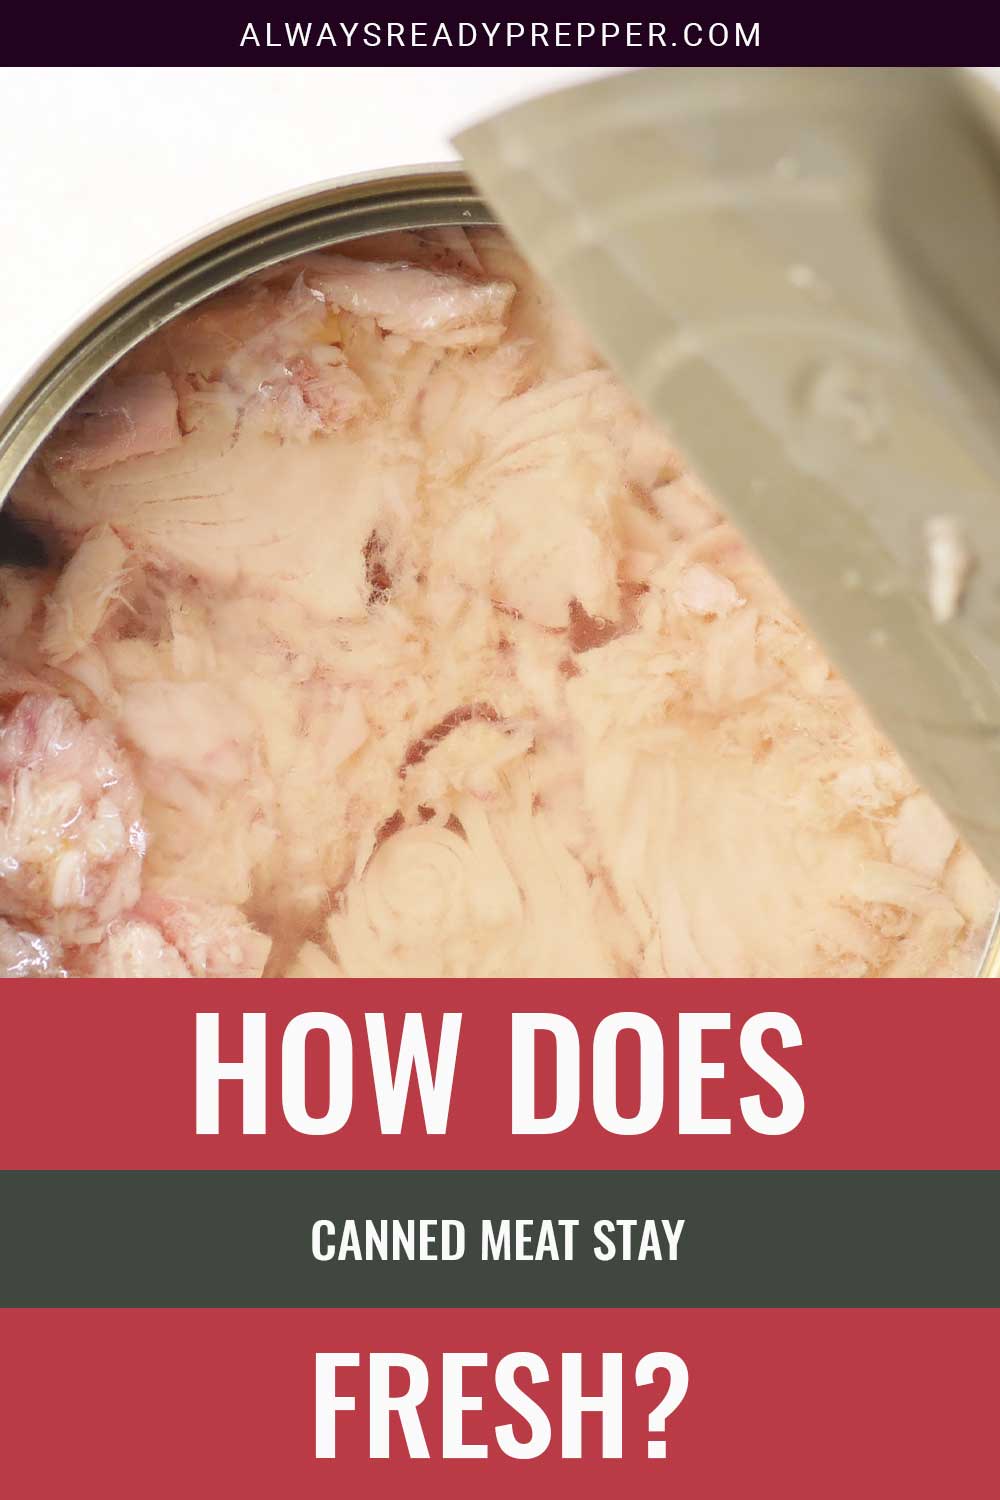 Meat in a can - How Does it Stay Fresh?